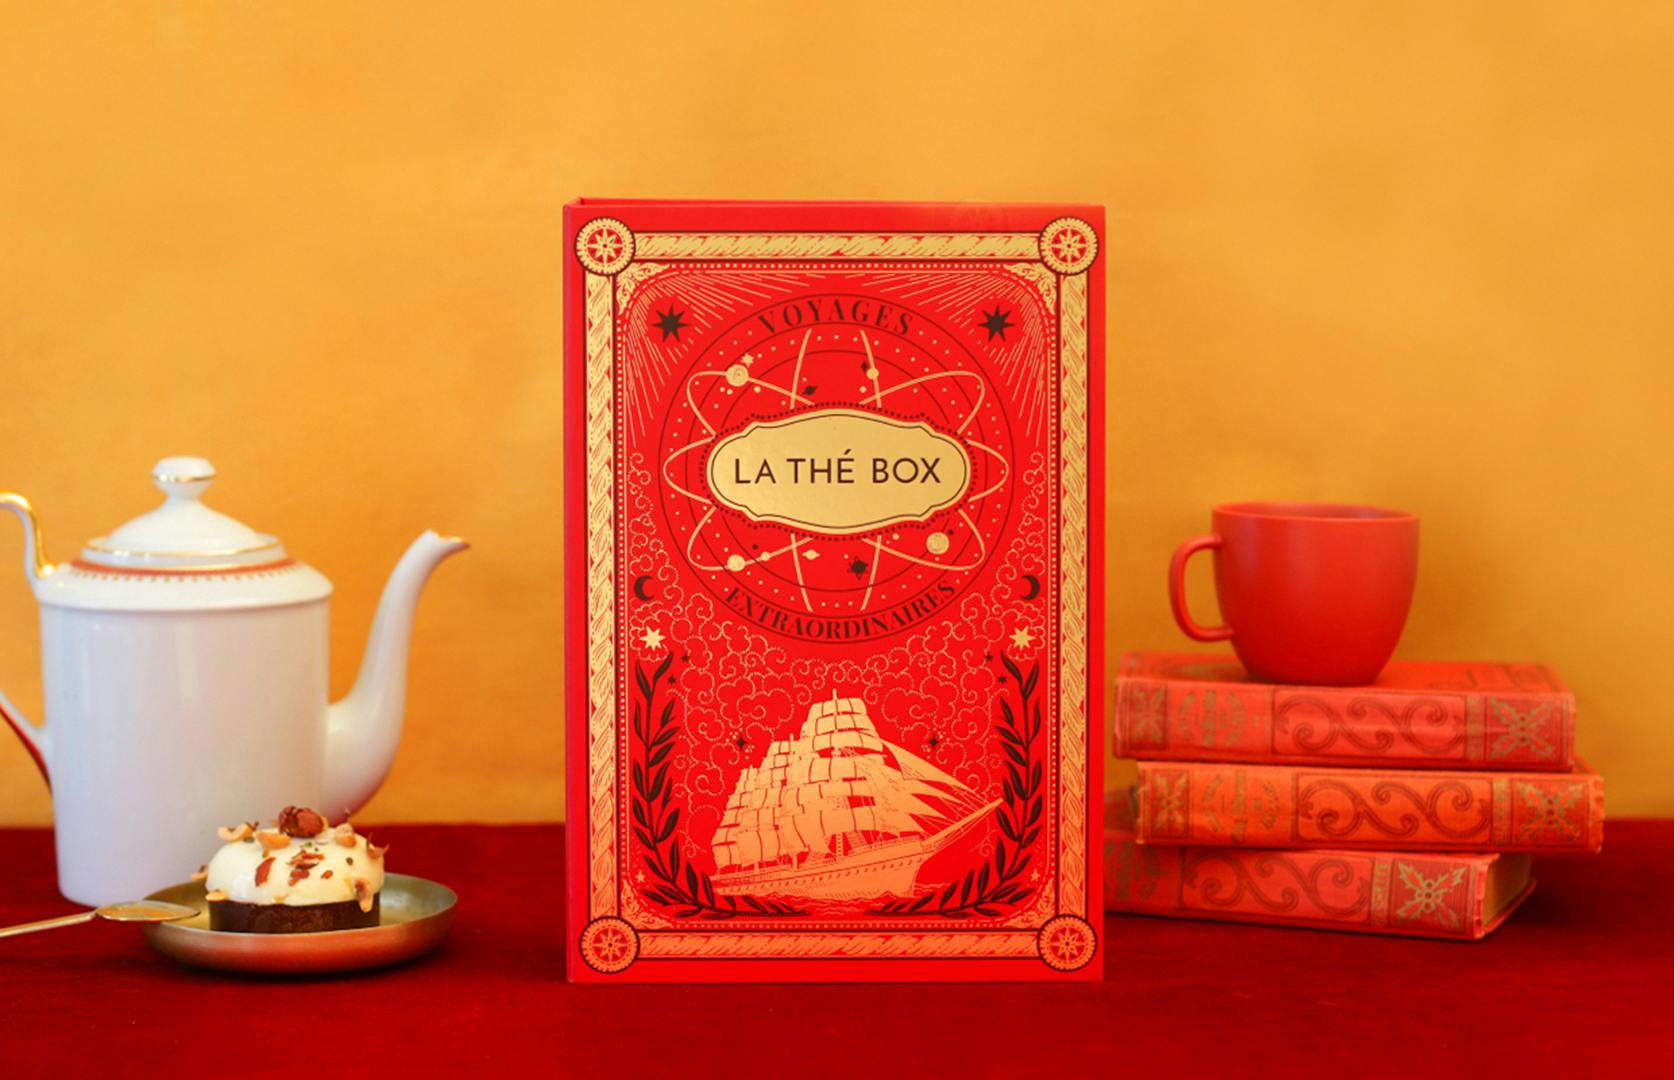 Packshot of la thé box Jules Verne edition with tea-pot and some books.